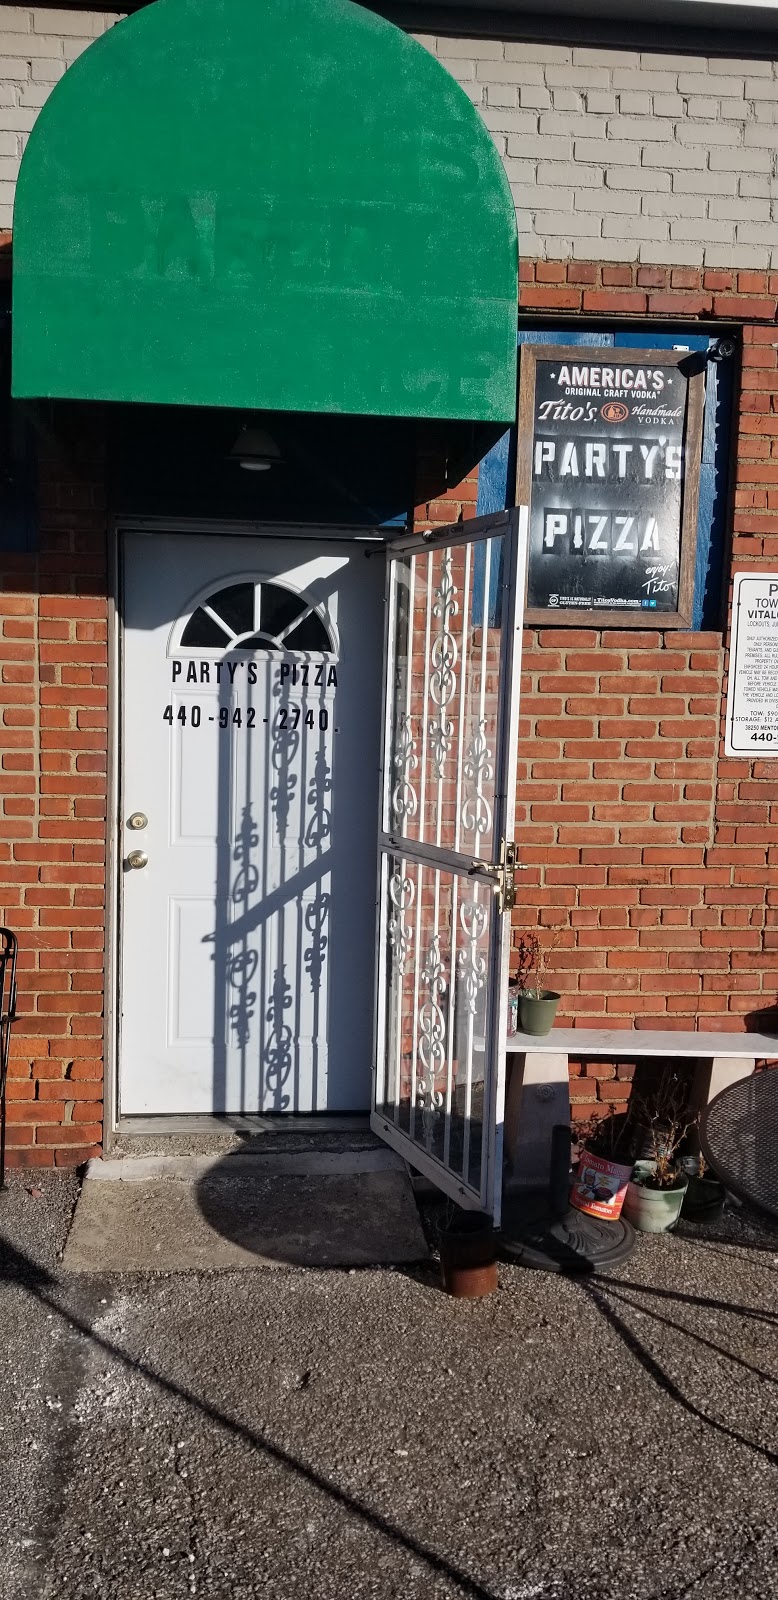 Partys Pizza | 1066 Lost Nation Rd, Willoughby, OH 44094, USA | Phone: (440) 942-2740